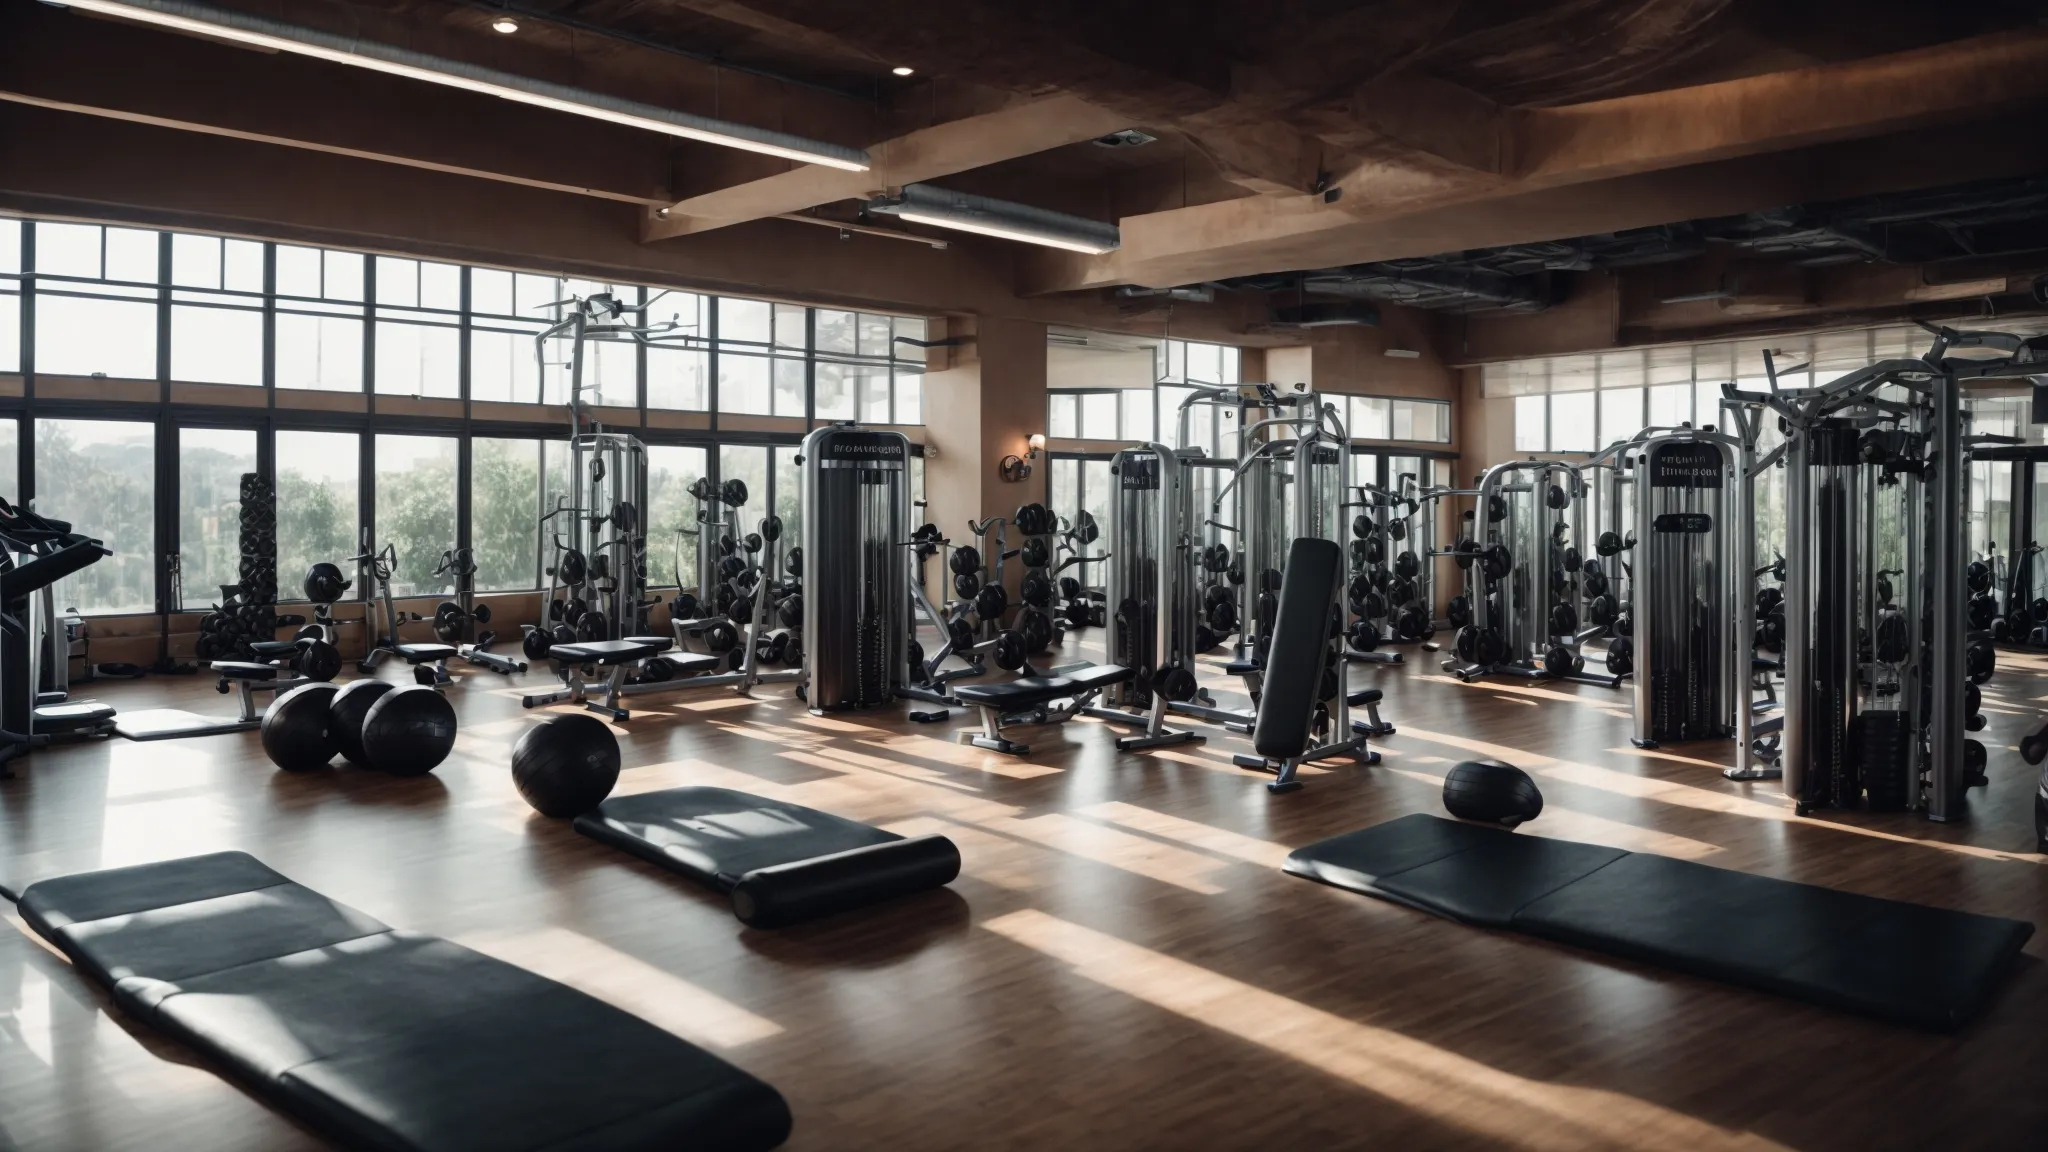 a panoramic view of a well-equipped gym interior bustling with fitness enthusiasts engaged in various workouts.